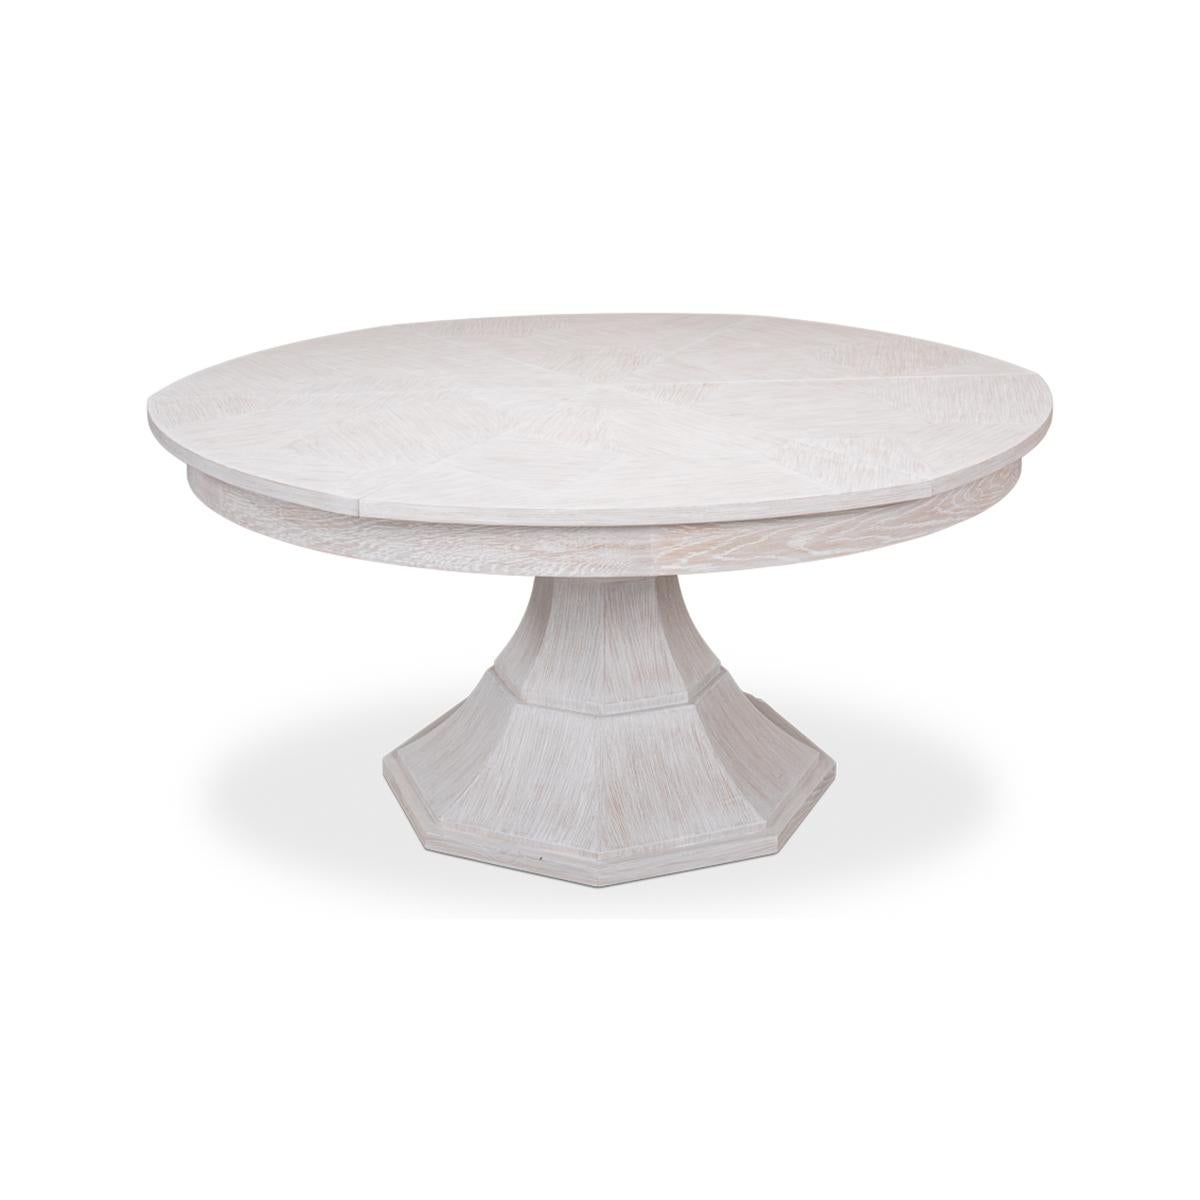 Wood Modern Round Dining Table - Whitewash Oak For Sale